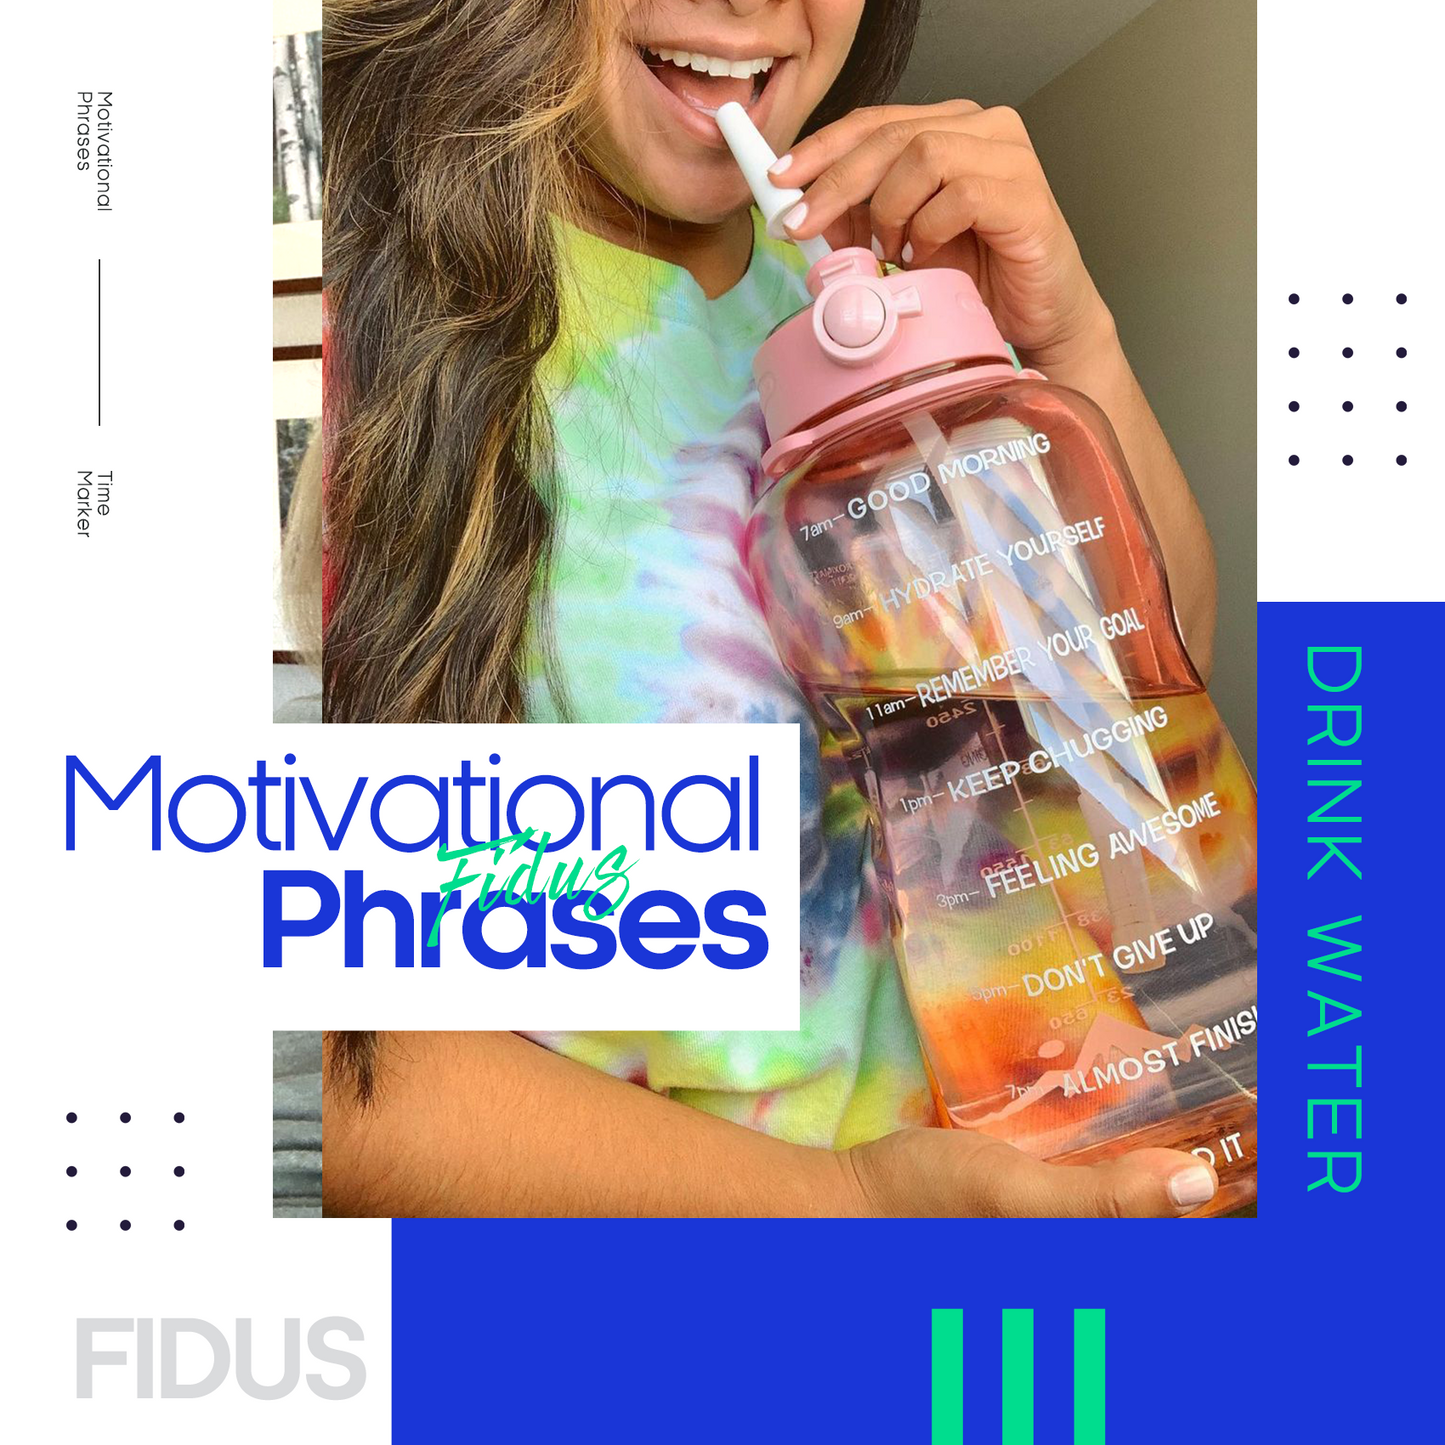 Fidus 64oz Motivational Water Bottle with Paracord Handle & Removable Straw